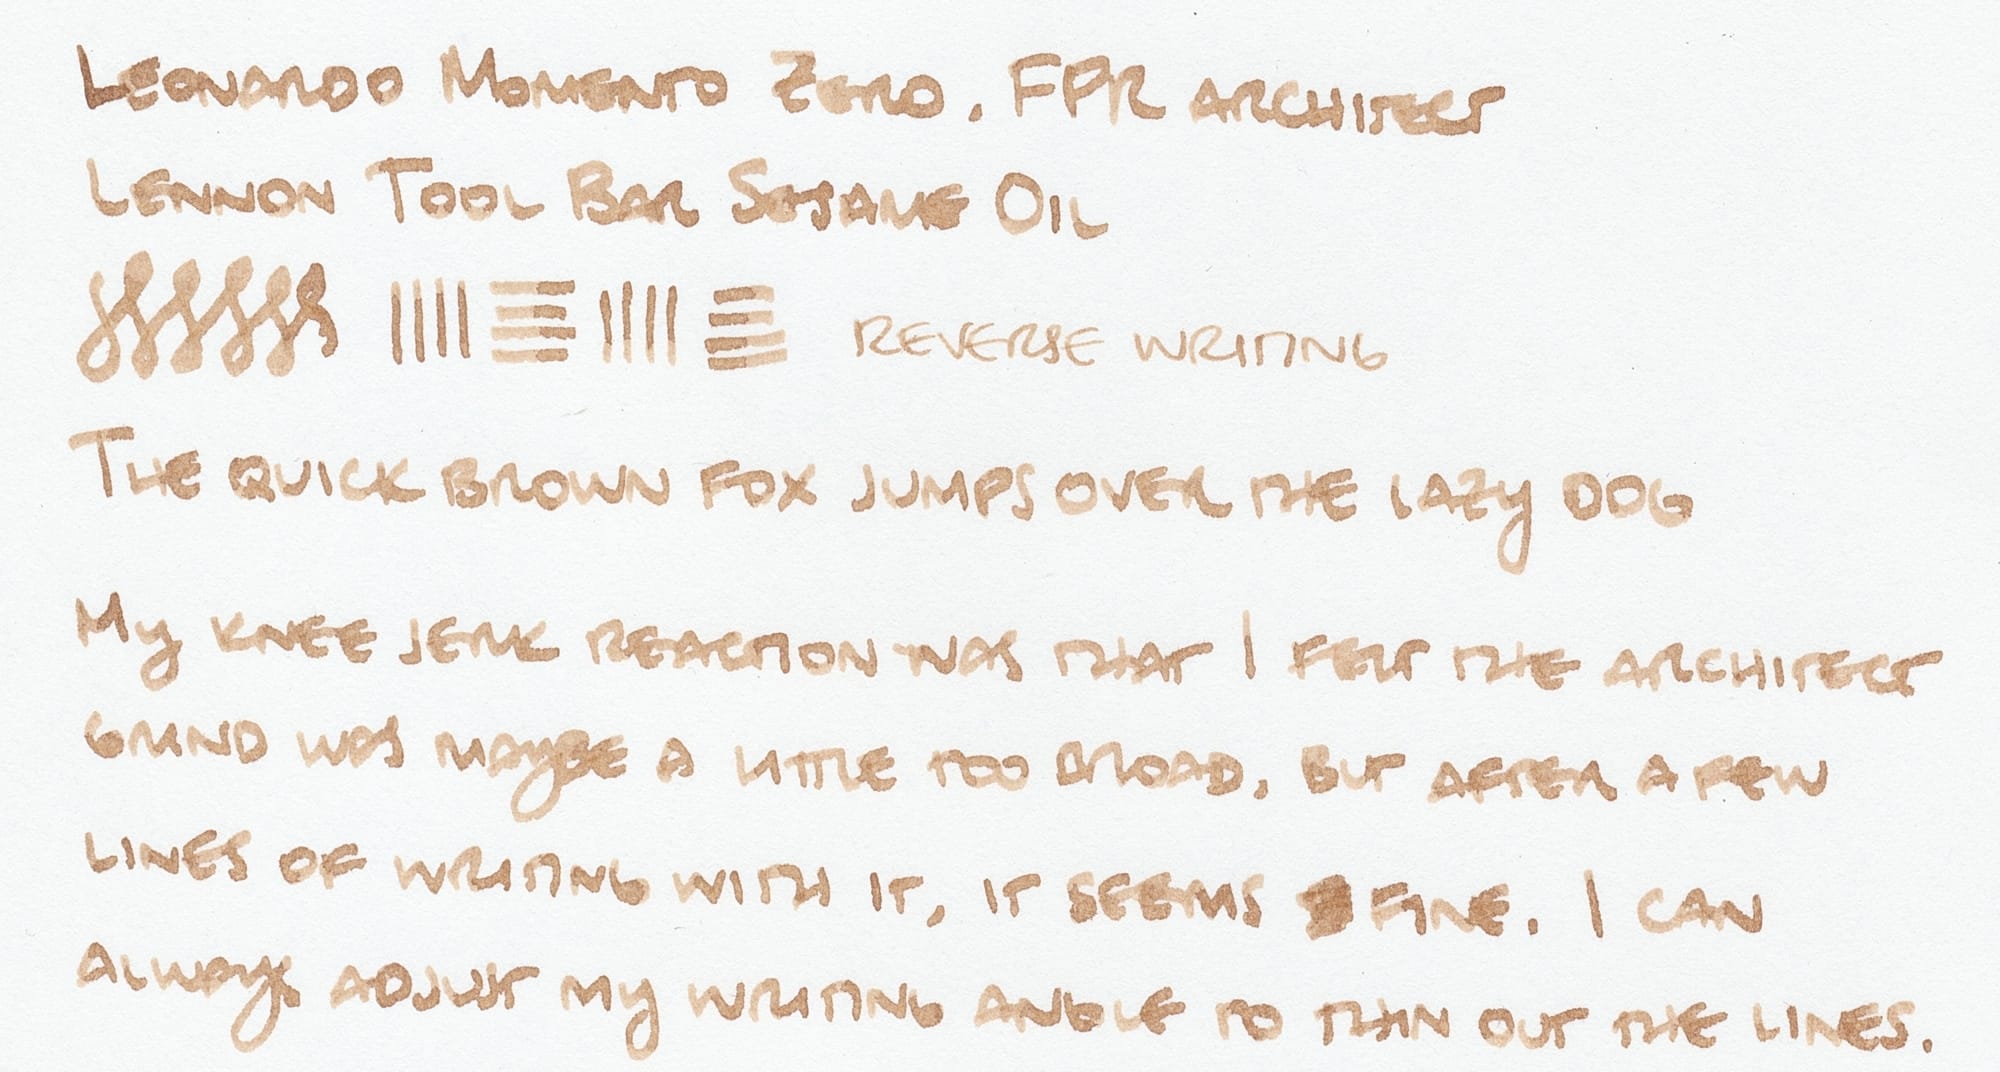 Scan of a writing sample using a Leonardo Momento Zero fountain pen with a Fountain Pen Revolution architect nib. Besides some figure 8 squiggles and horizontal and vertical lines showing the thinner vertical line widths vs. the thicker horizontal line widths and a reverse writing sample, "The quick brown fox jumps over the lazy dog" is written to show off the ink's performance.